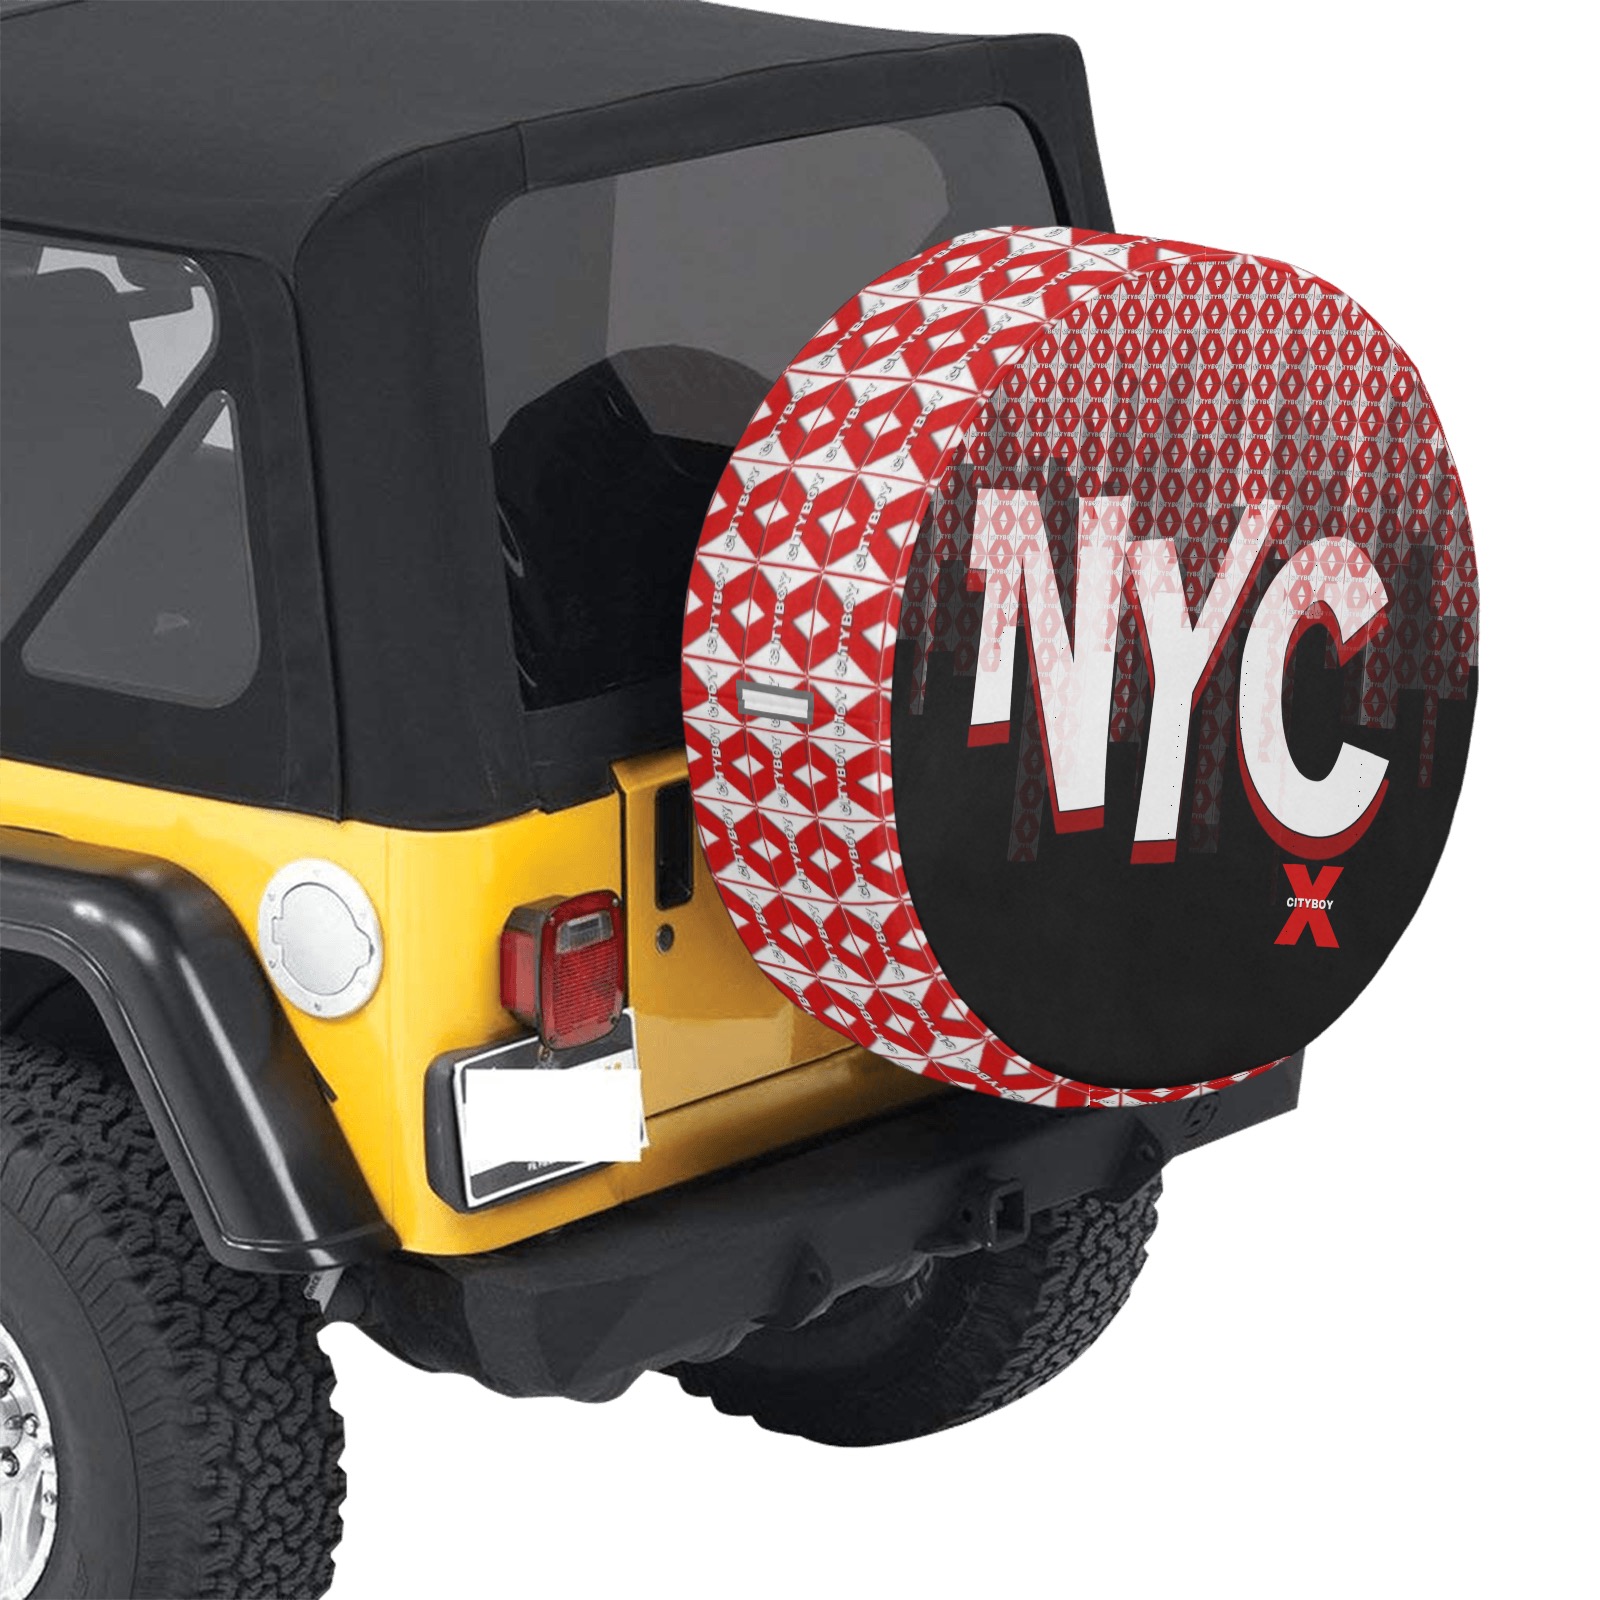 CITYBOY NYC print 34 Inch Spare Tire Cover